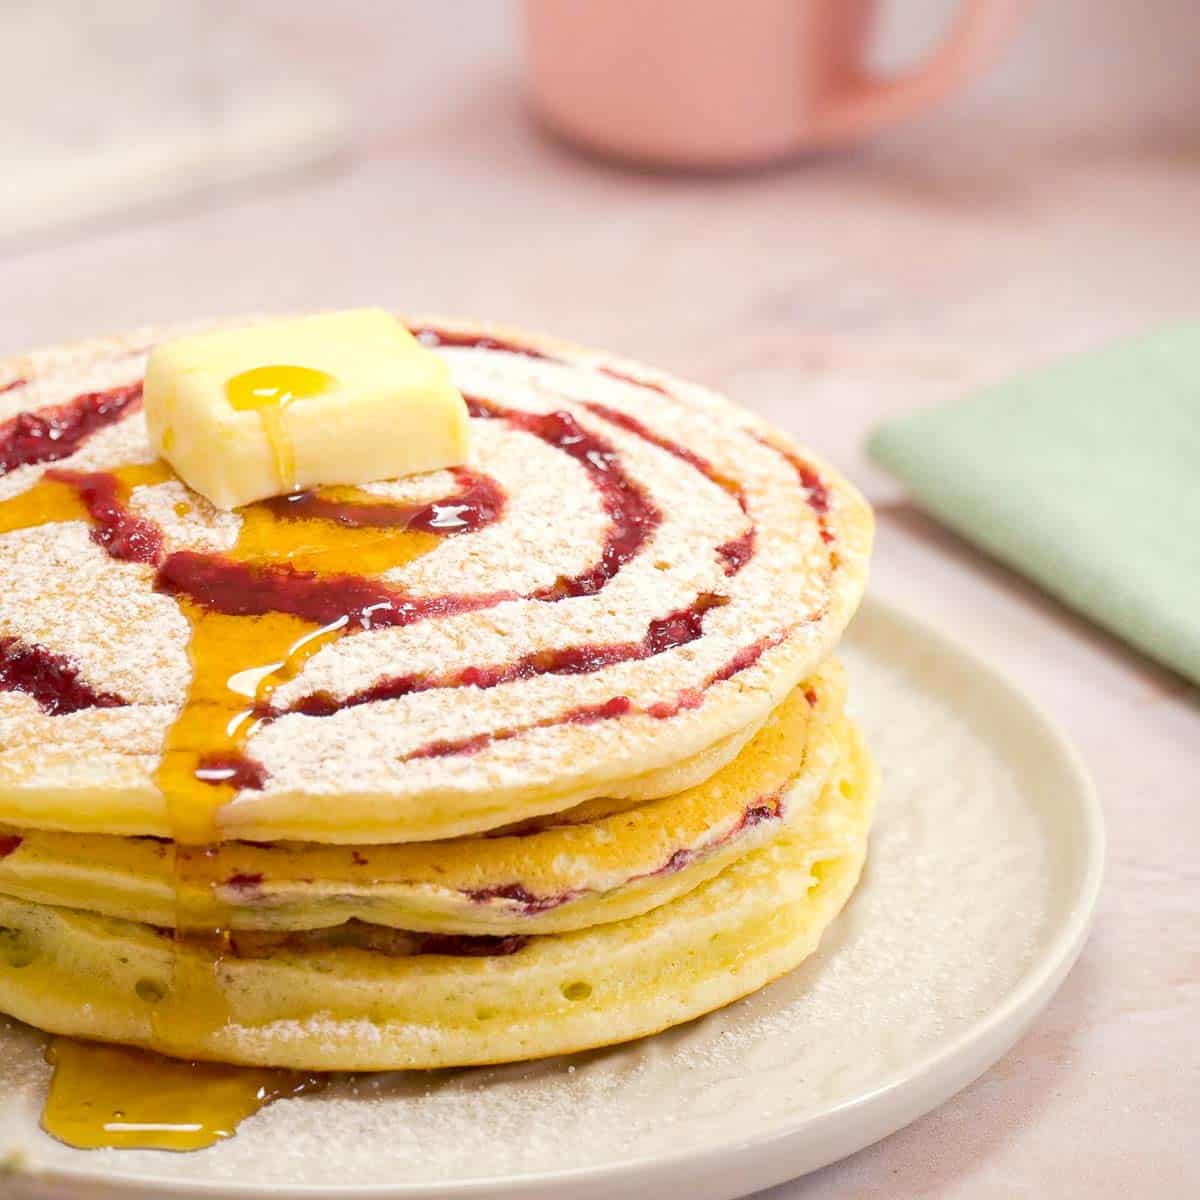 Maple syrup dripping off the side of a stack of raspberry pancakes with a swirl pattern on top.